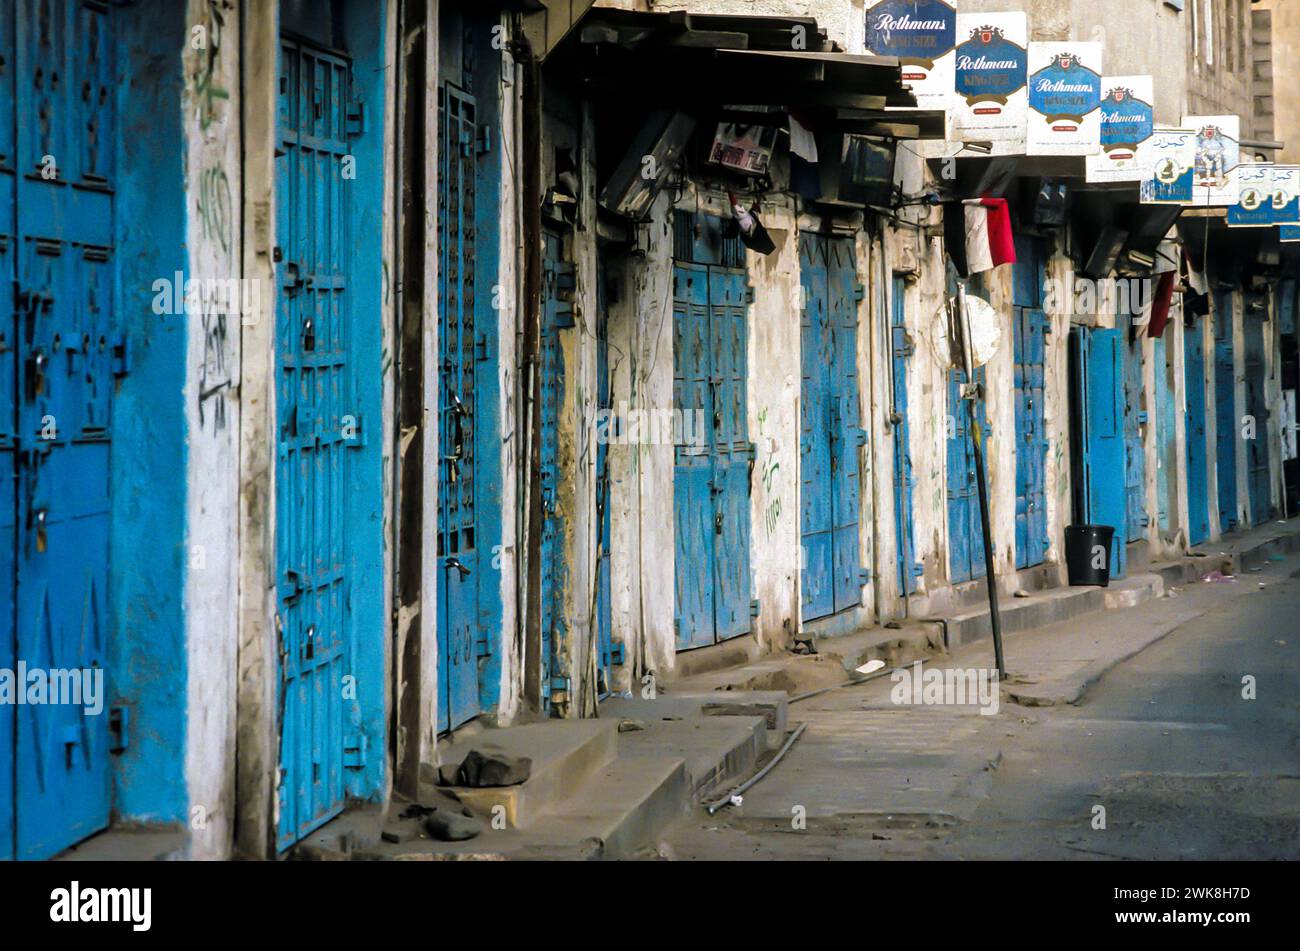 Sanaa, Yemen - July 1, 1991: closed shops in Sanaa with typical blue doors all with advertising for the cigatette brand Rothmans. Stock Photo